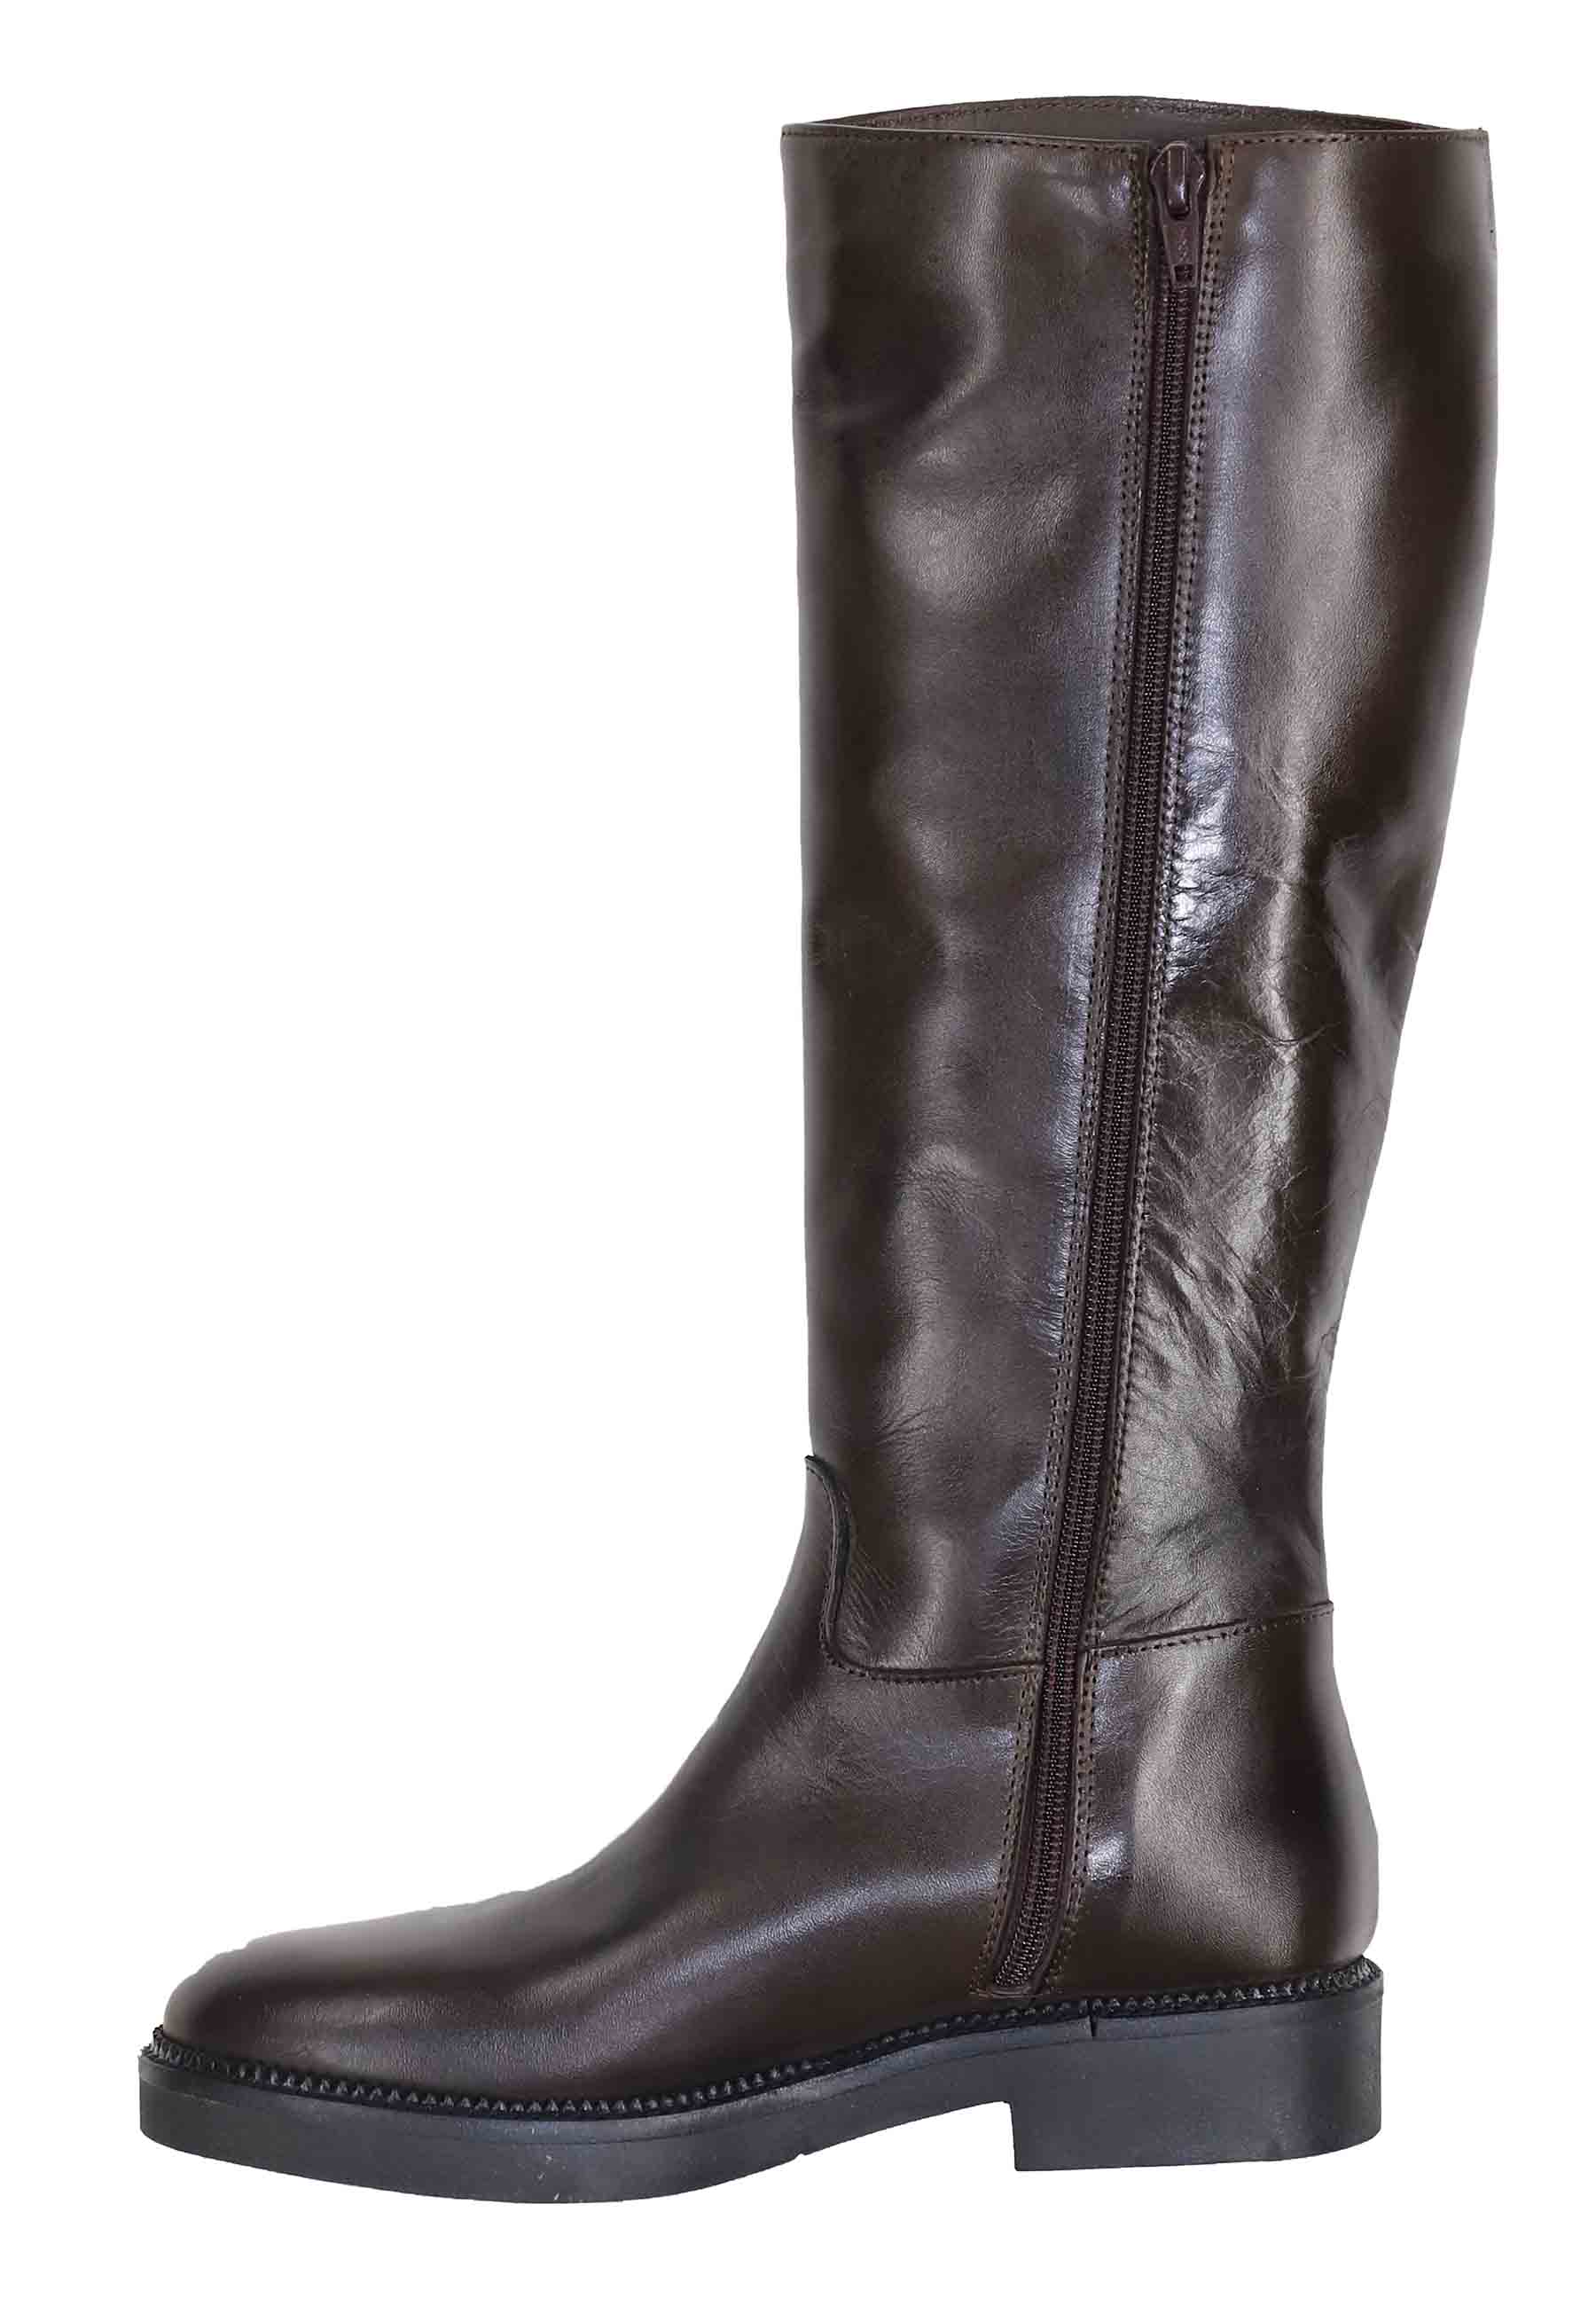 Women's boots in dark brown leather with low heel and round toe